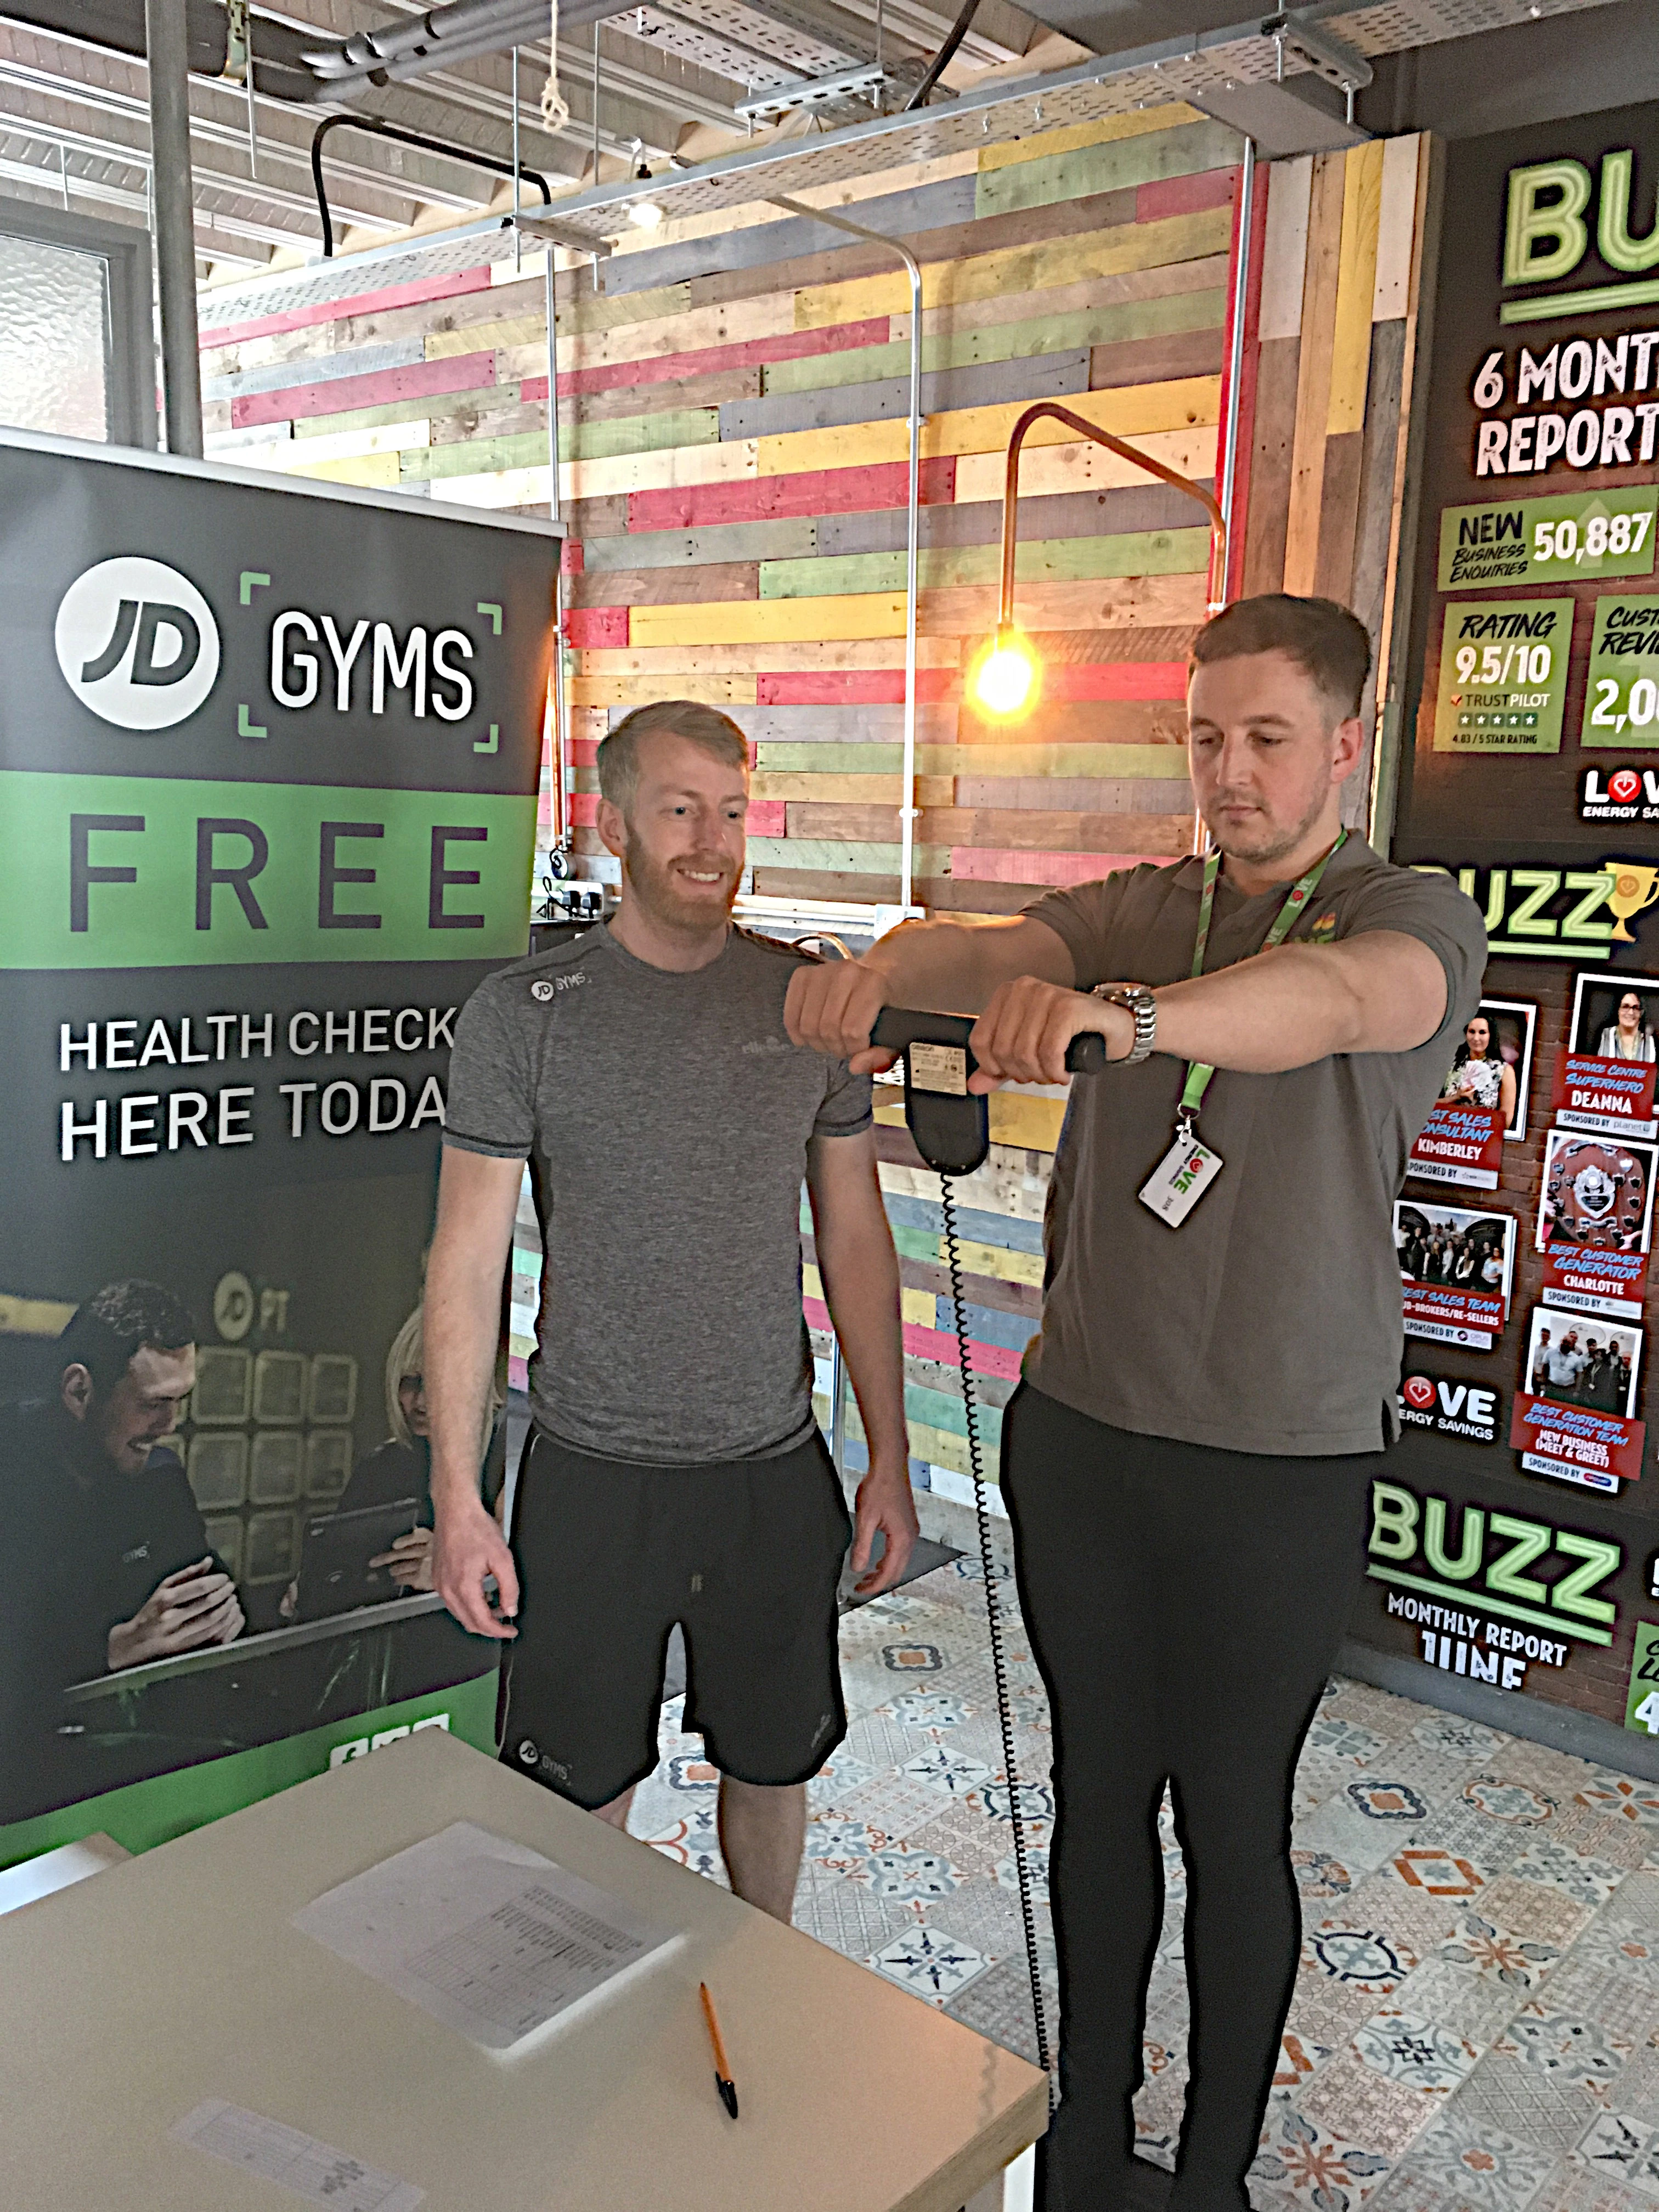 Love Energy Savings staff member Brian Foster is put through his paces by JD Gyms' staff